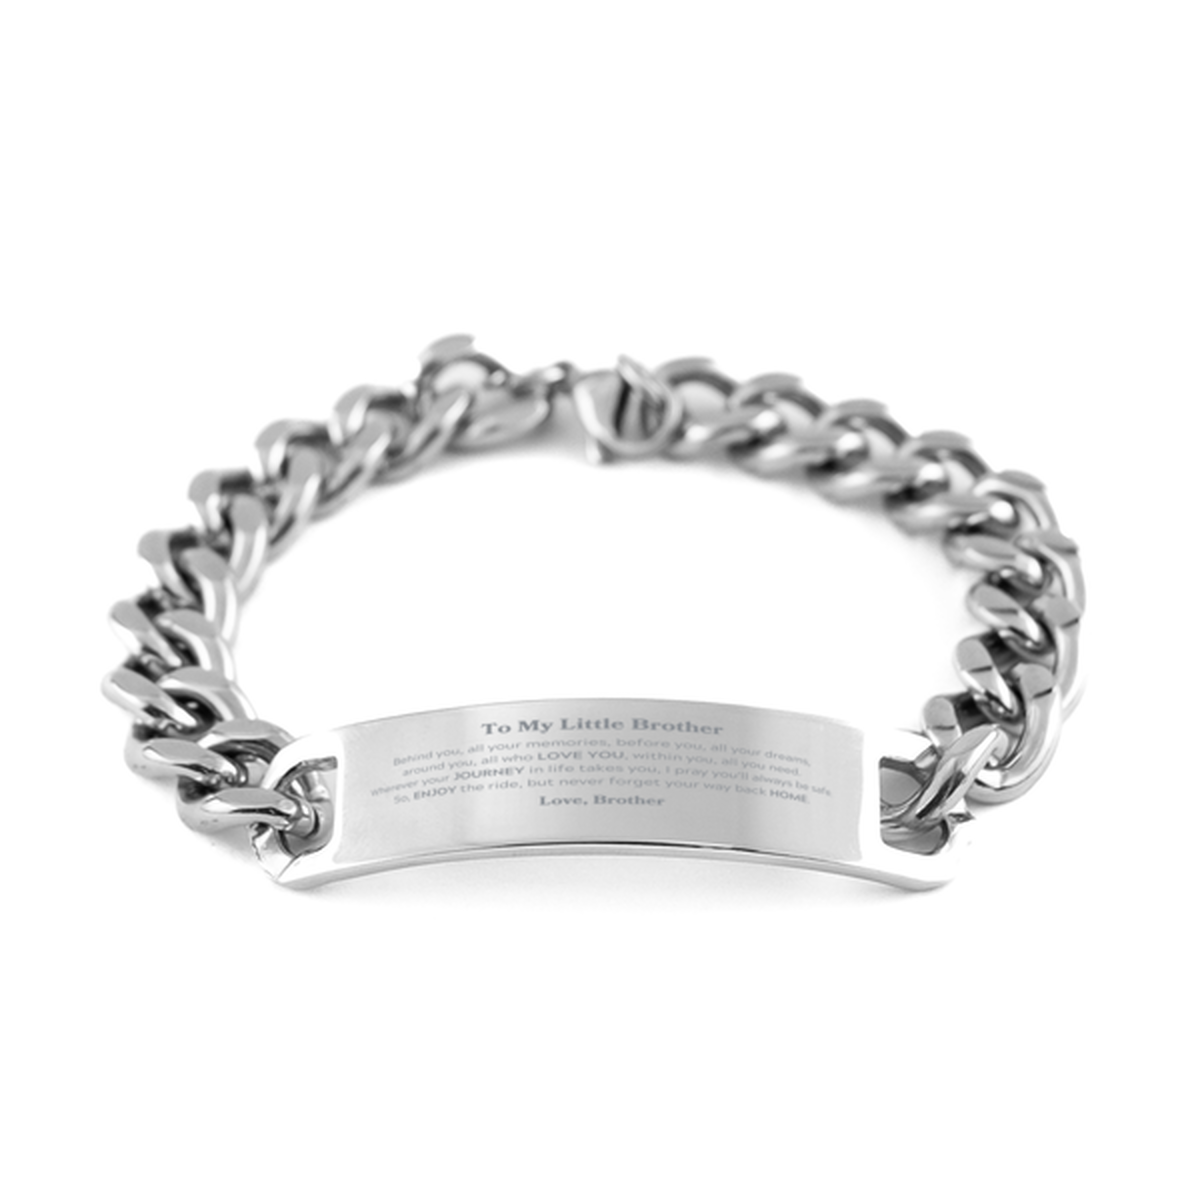 To My Little Brother Graduation Gifts from Brother, Little Brother Cuban Chain Stainless Steel Bracelet Christmas Birthday Gifts for Little Brother Behind you, all your memories, before you, all your dreams. Love, Brother